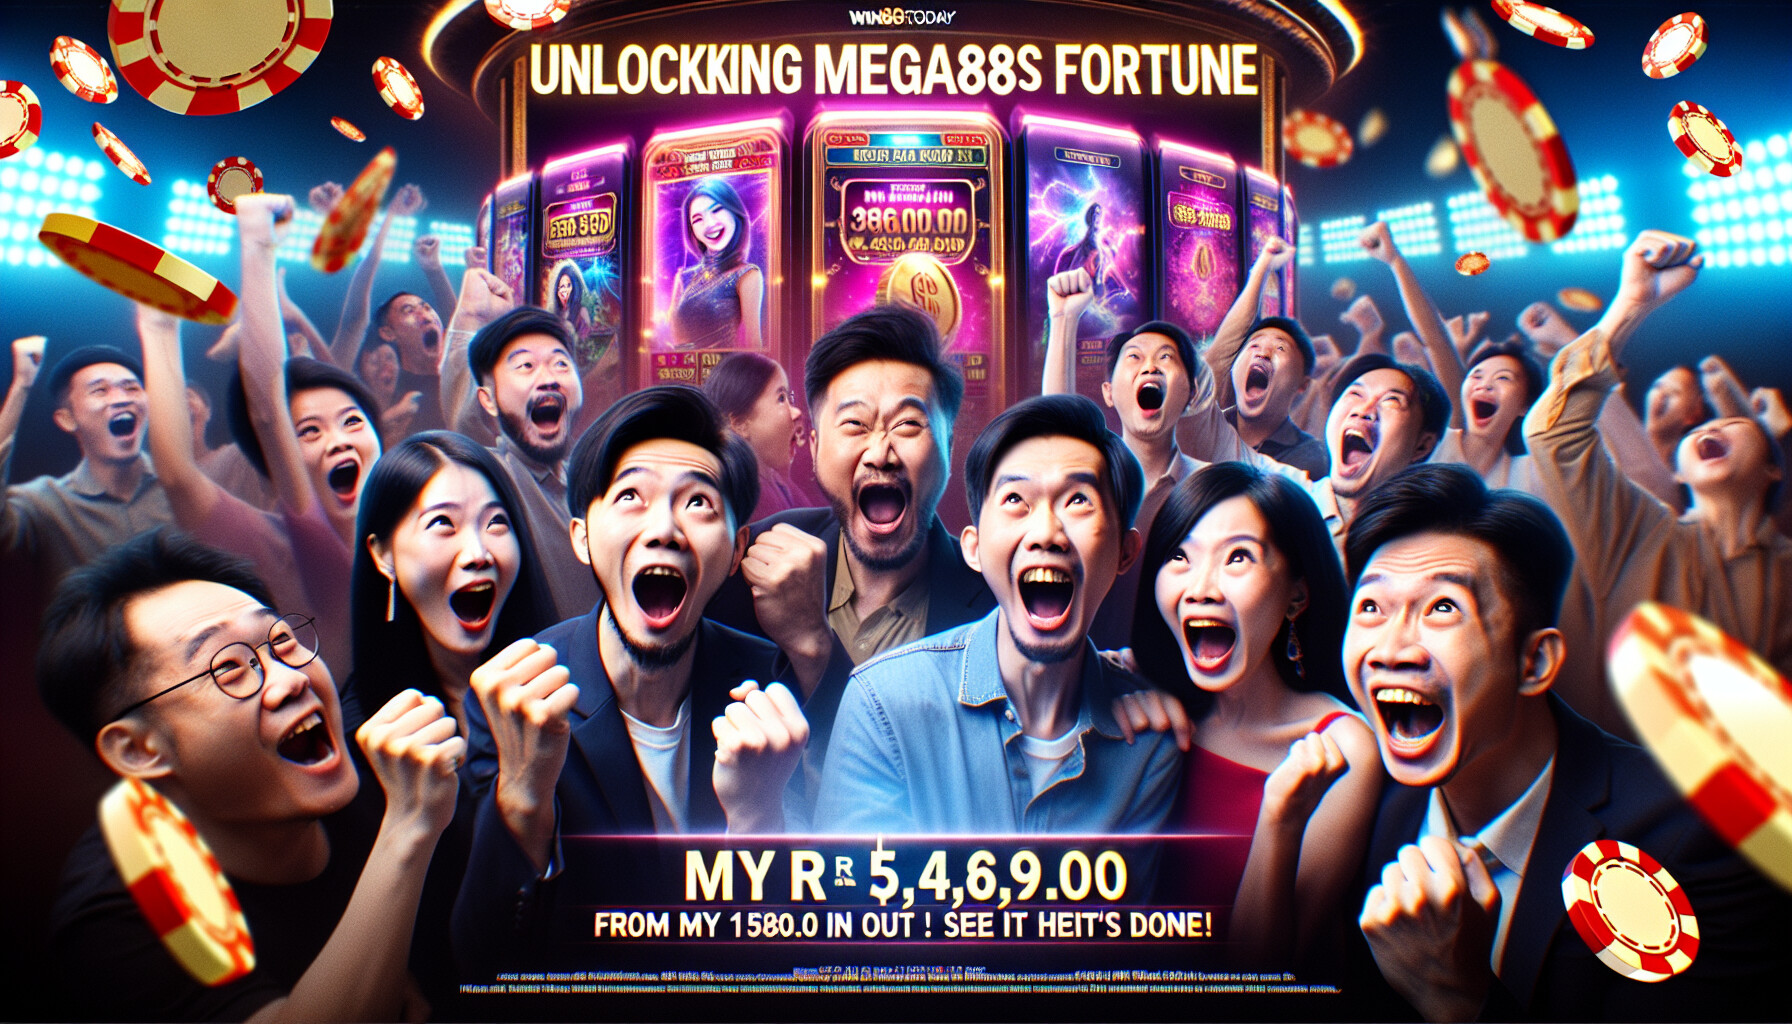 🎰 Ready to be amazed by Mega888? Follow my exhilarating journey from RM150 to RM4,869 and watch how luck transformed! Don't miss out on the excitement! 😱💰🔥 #Mega888 #luck #transformation